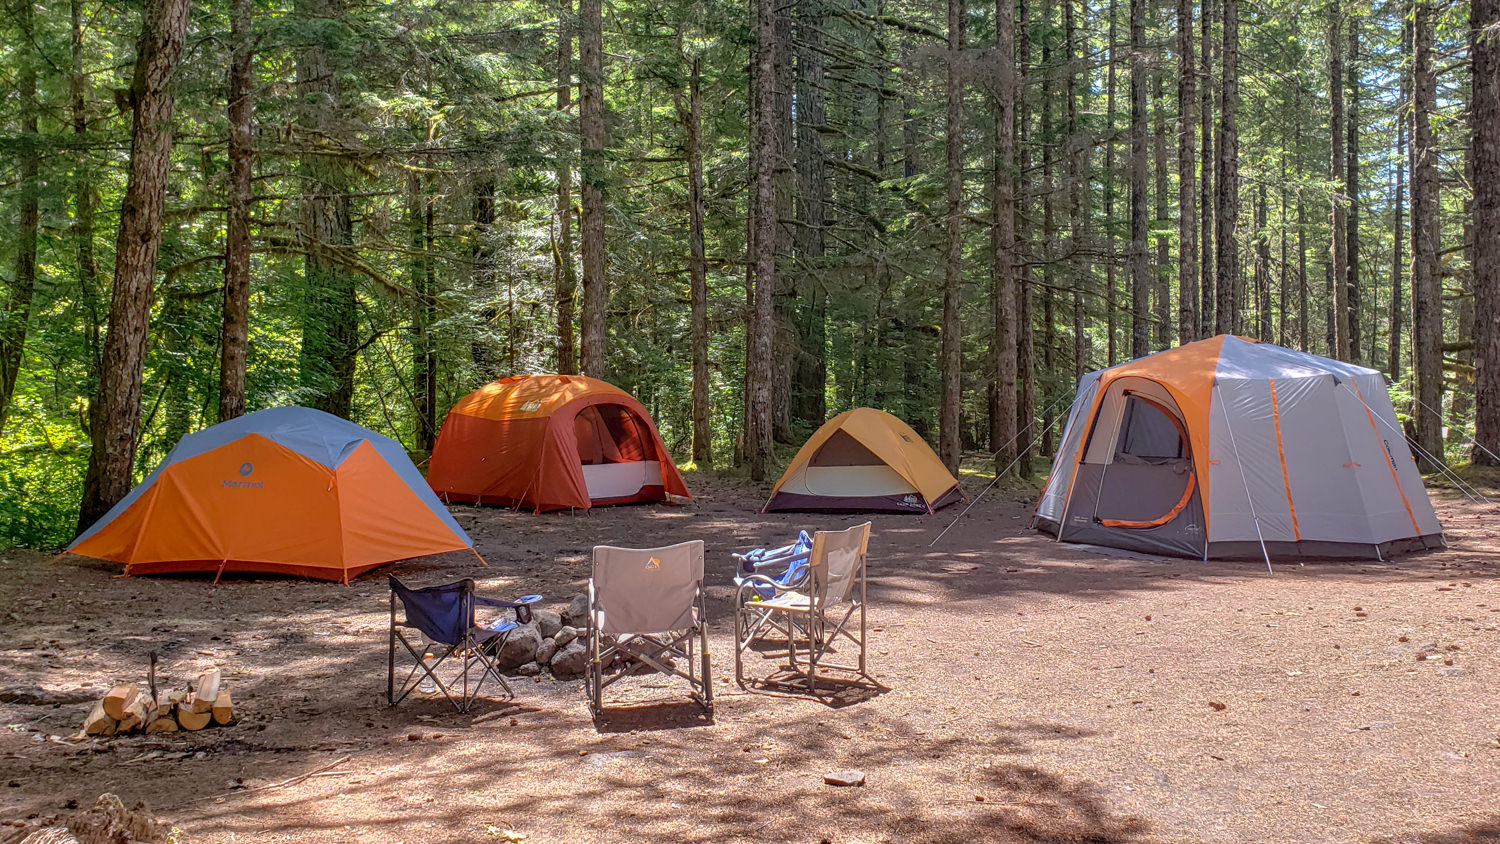 Camping Tents Online : Buy Tents for Camping in India @ Best